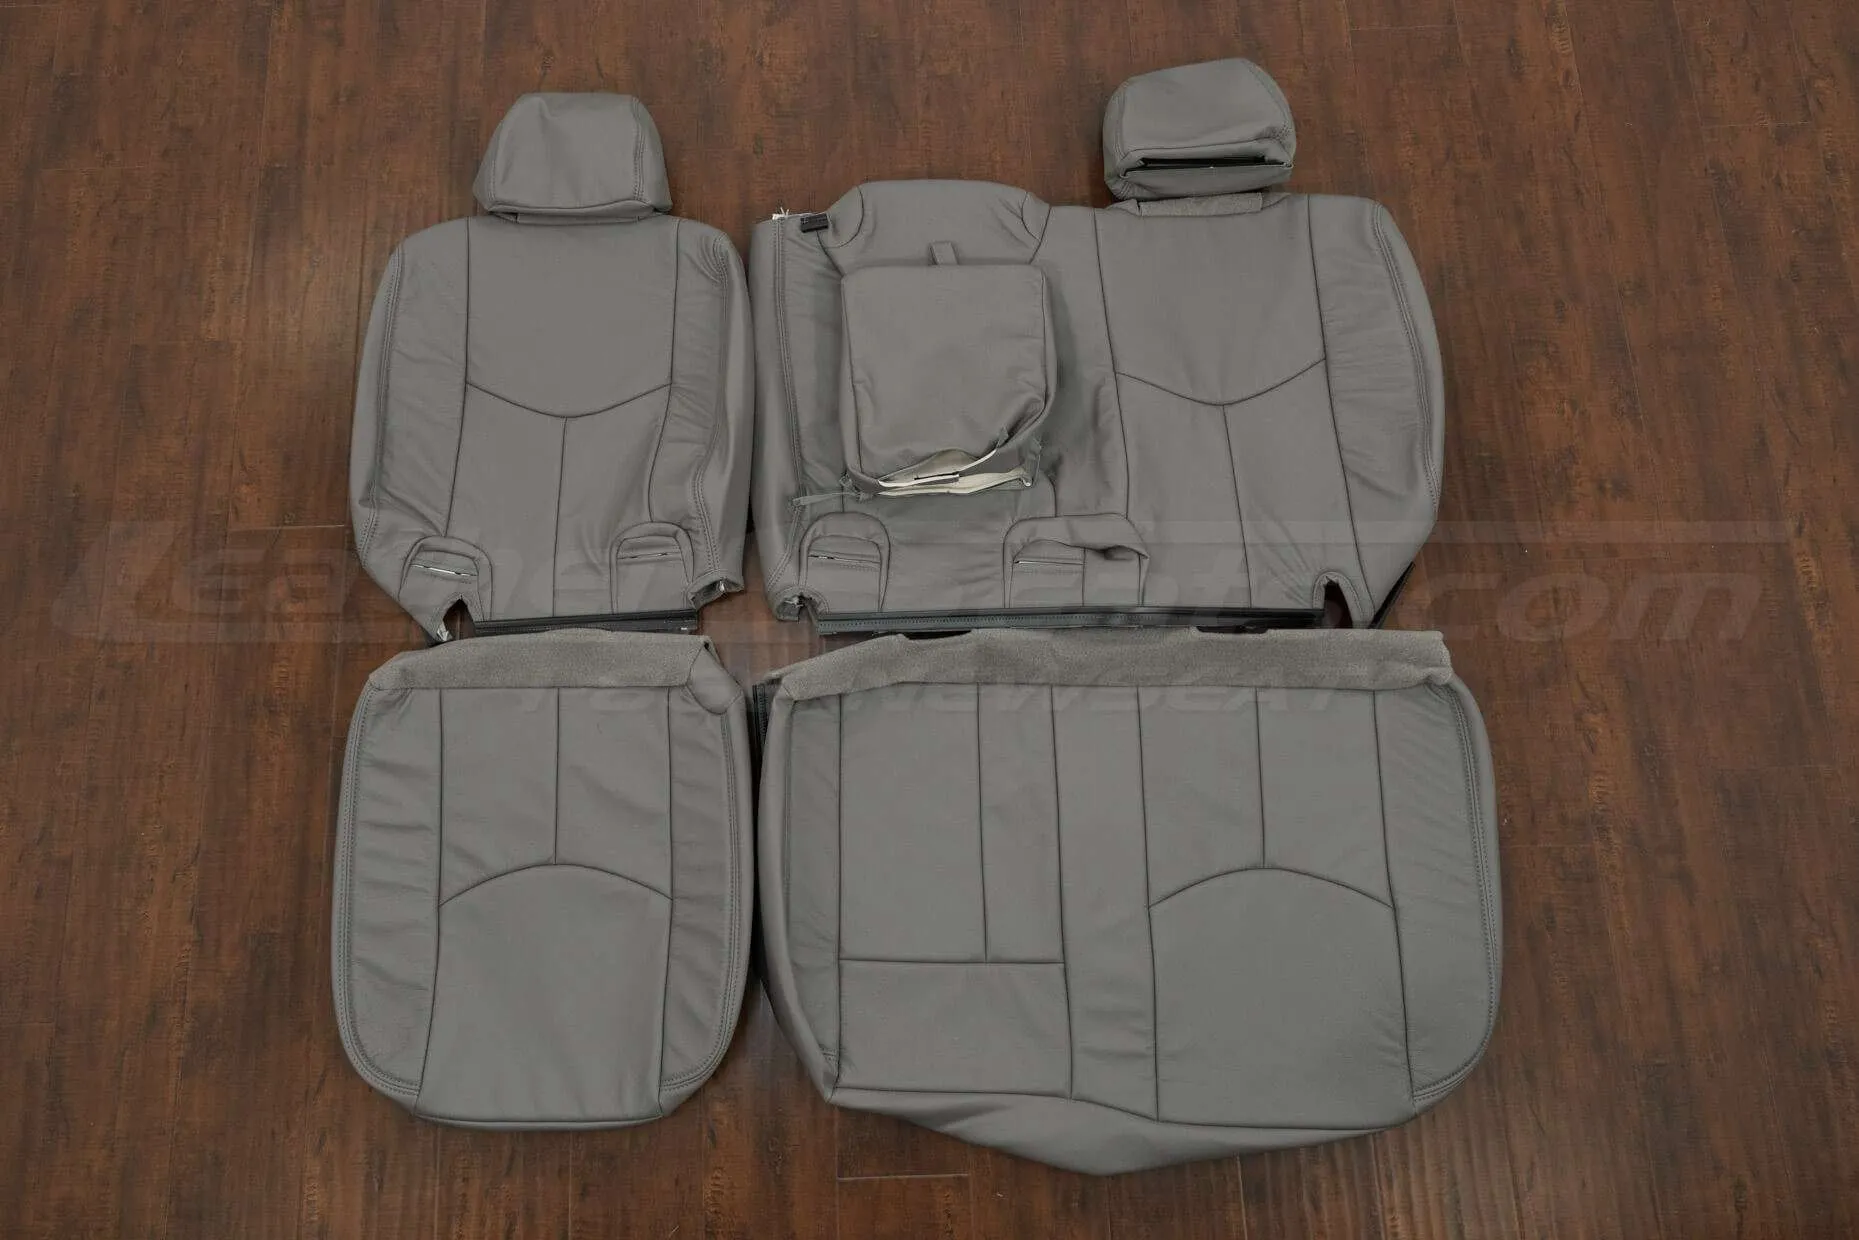 2003-2006 Chevrolet Tahoe 4Dr Leather Upholstery Kit - Smoke - Rear seat upholstery w/ Armrest